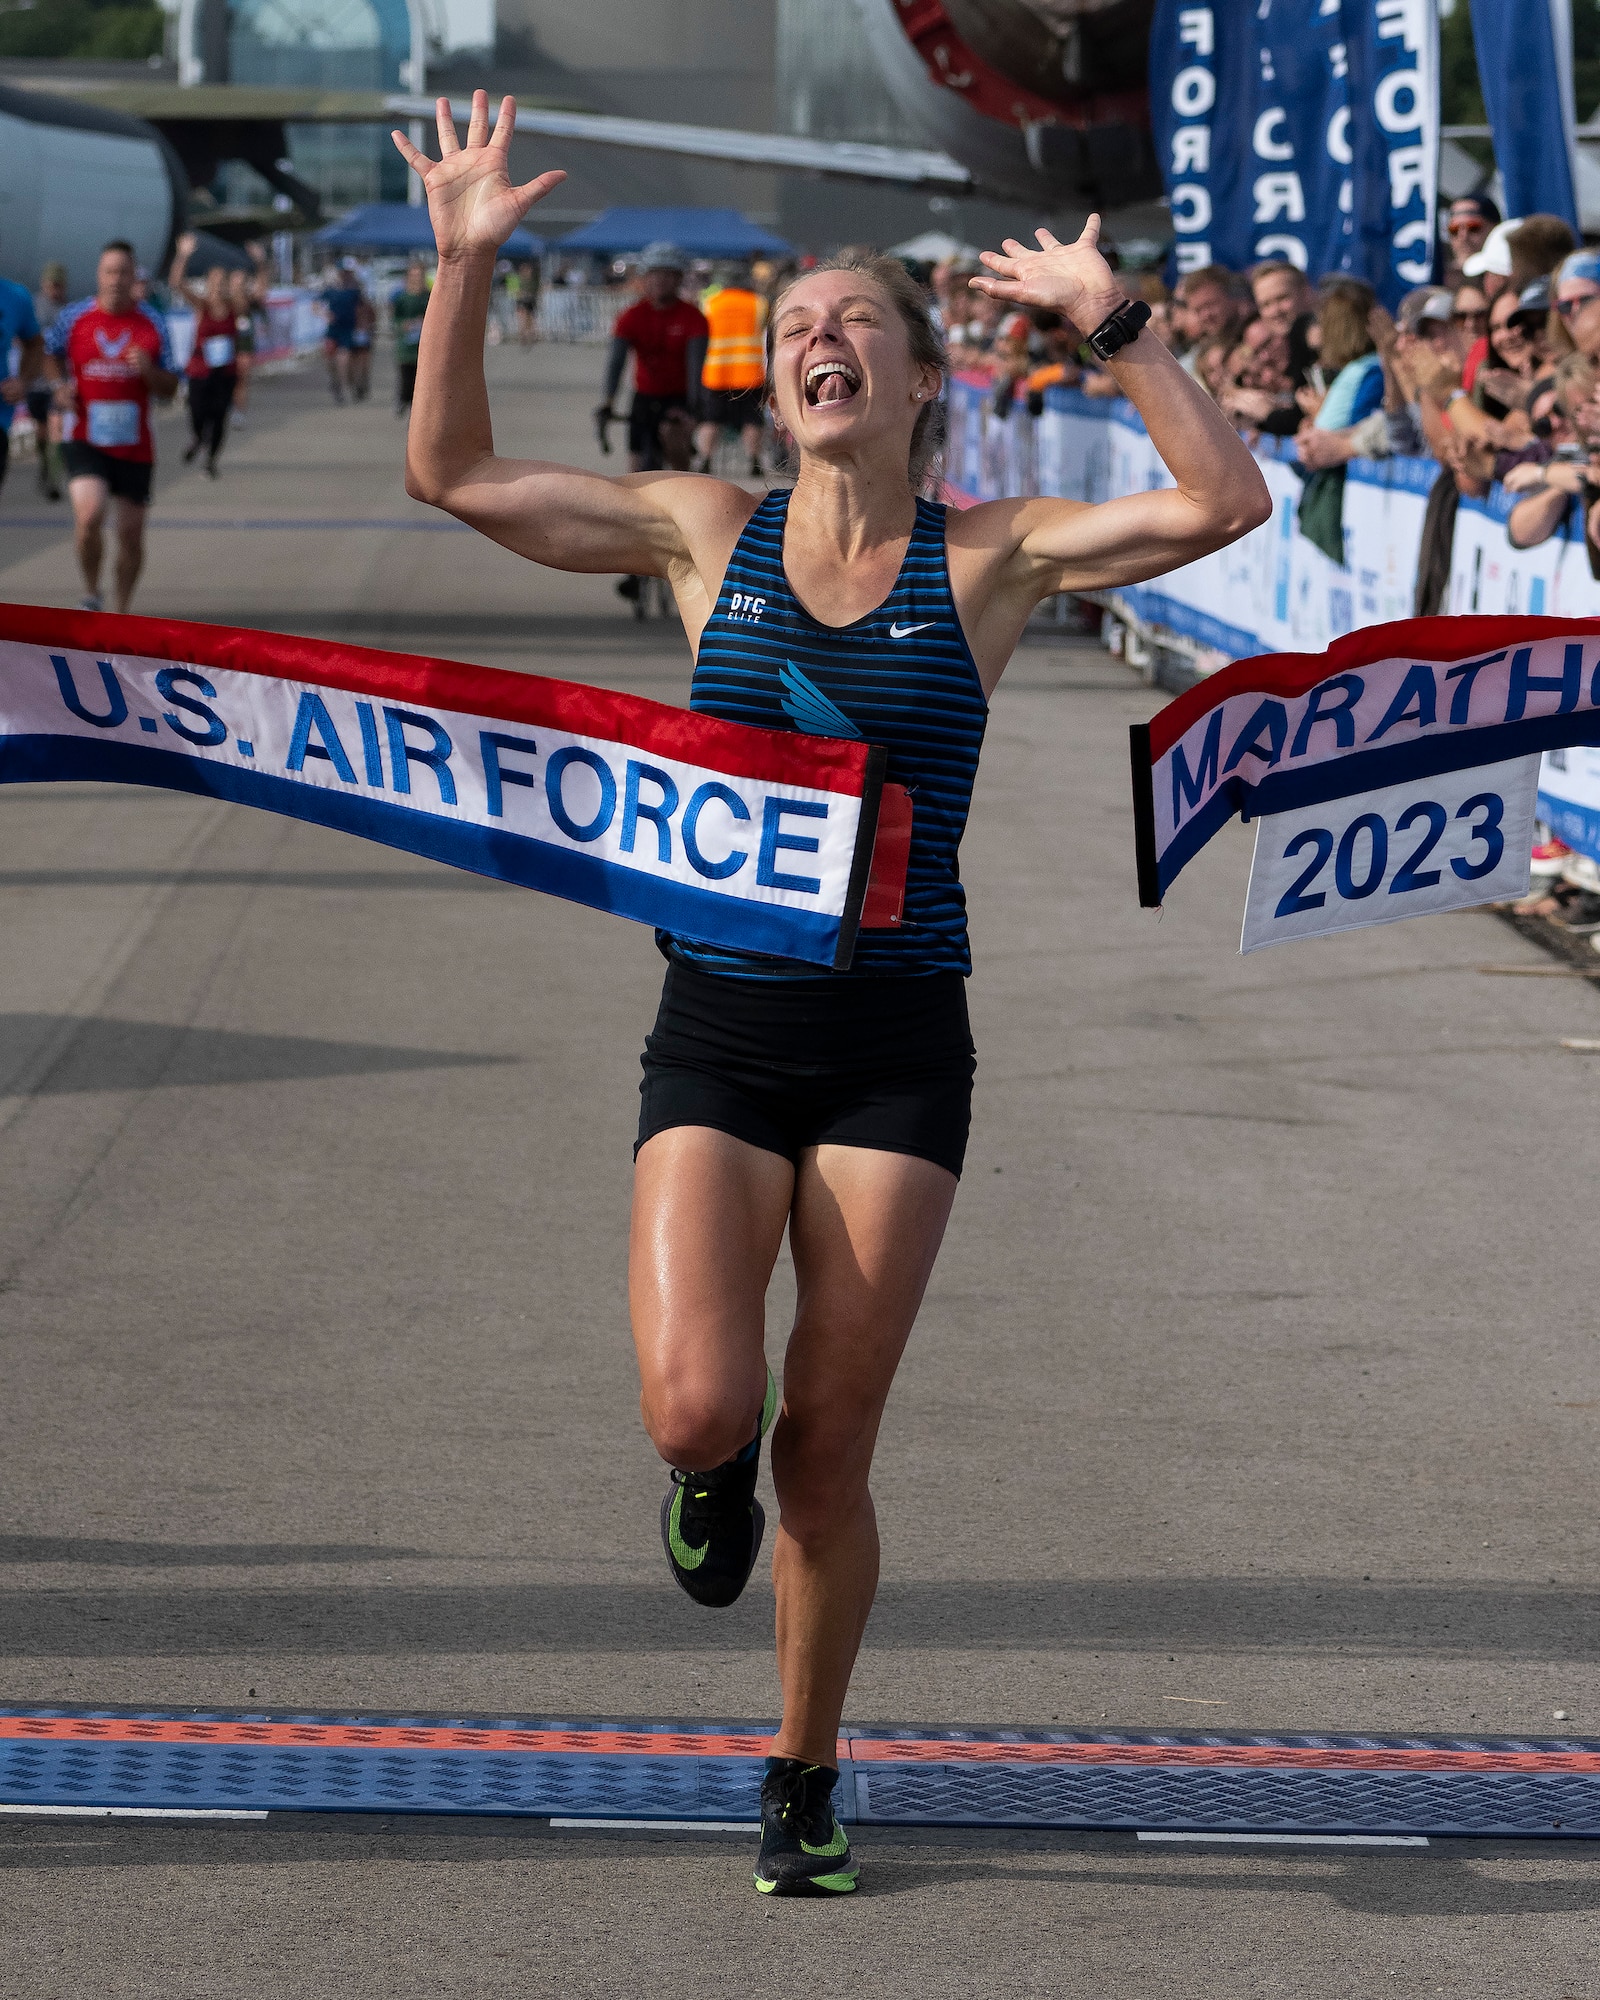 A woman in raises her arms as she breaks through a red, white and blue banner with "U.S. Air Force Marathon" on it.